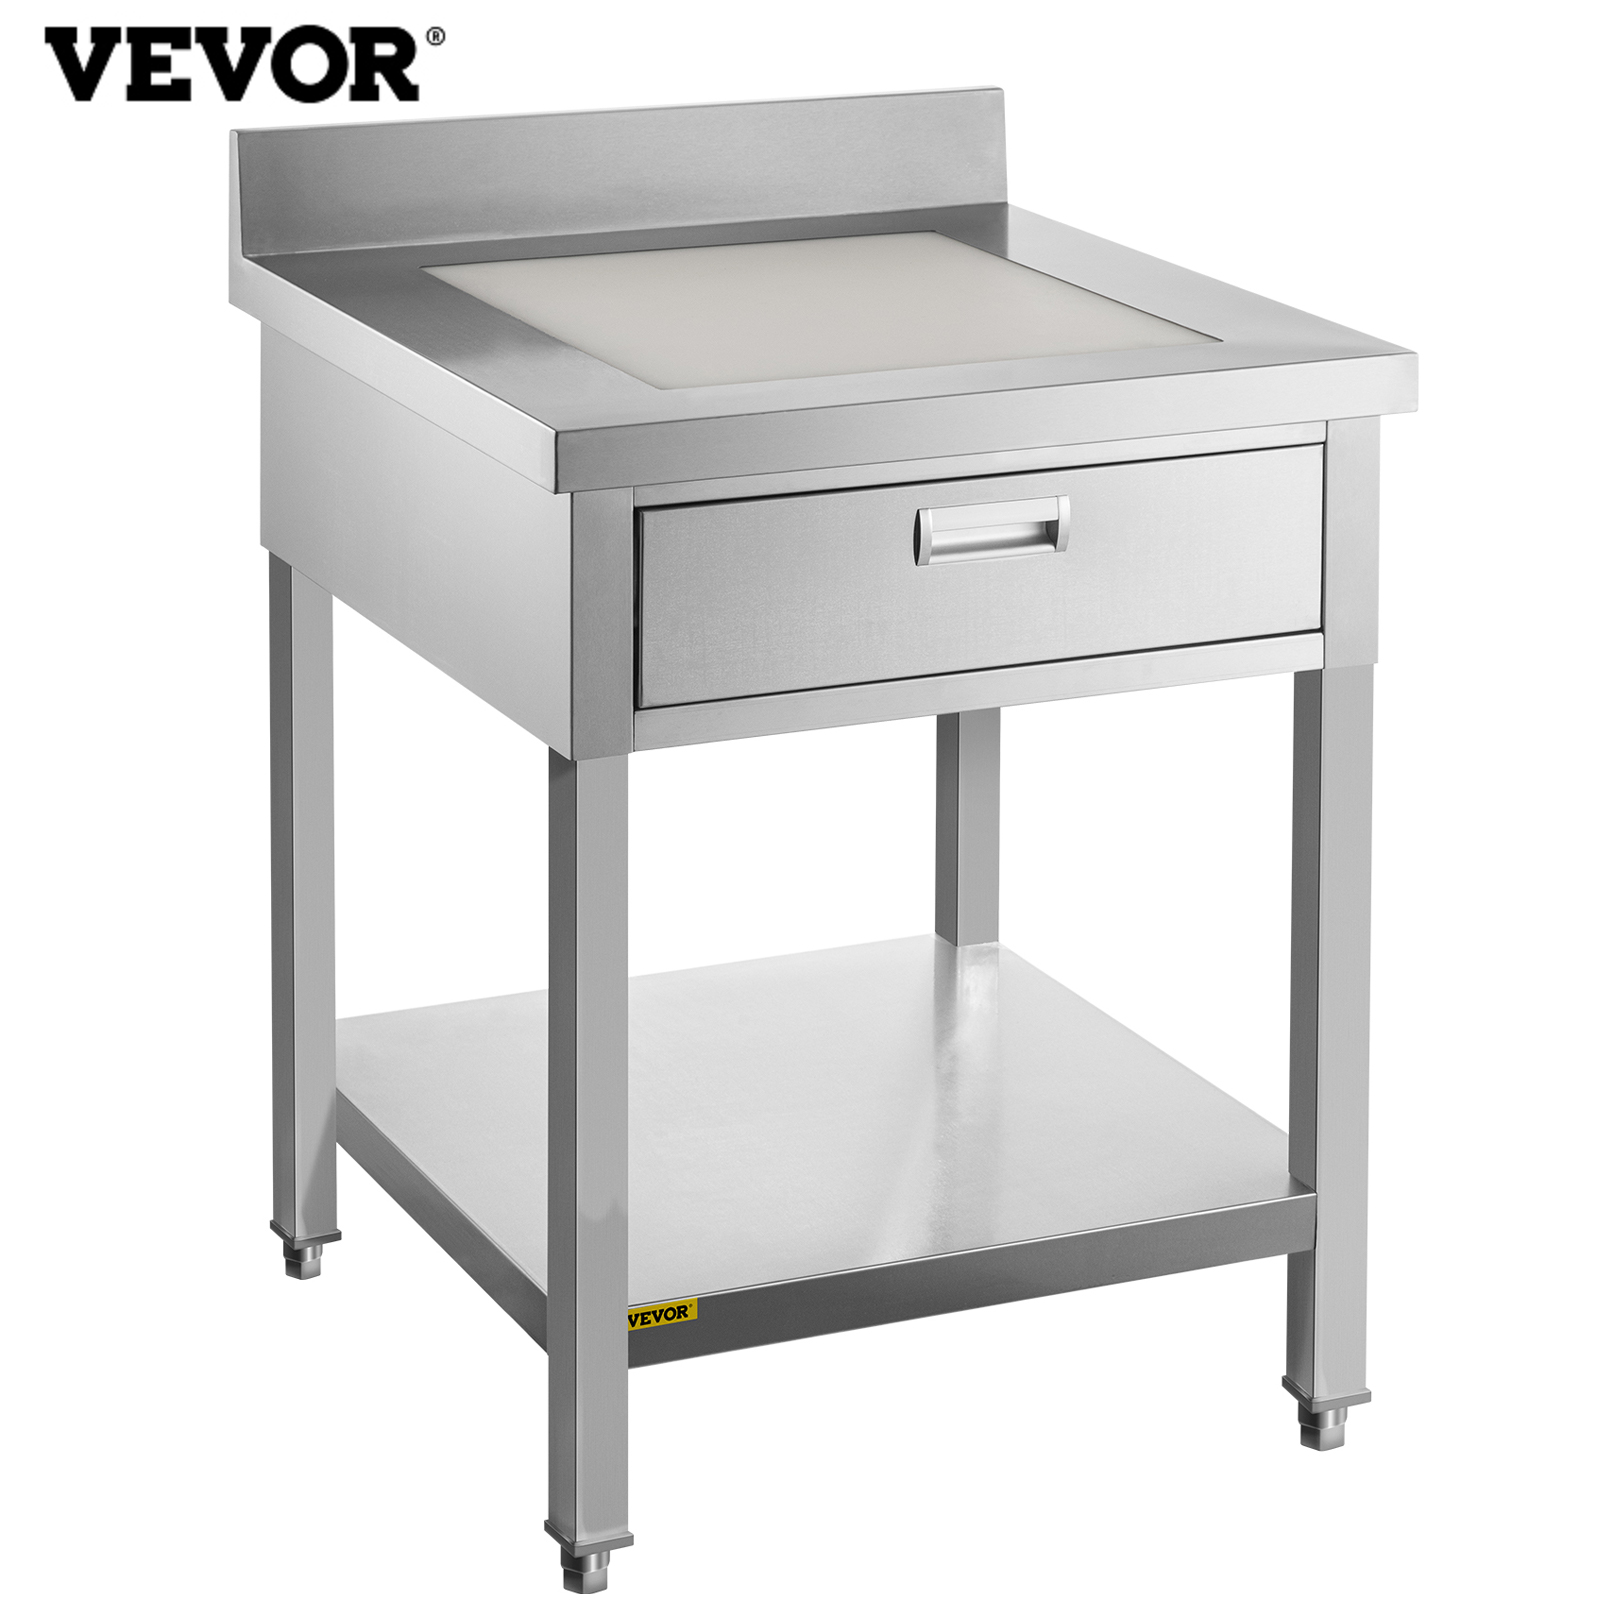 Vevor Commercial Food Prep Table Stainless Steel Cater Table Bench Worktop Home от Vevor Many GEOs